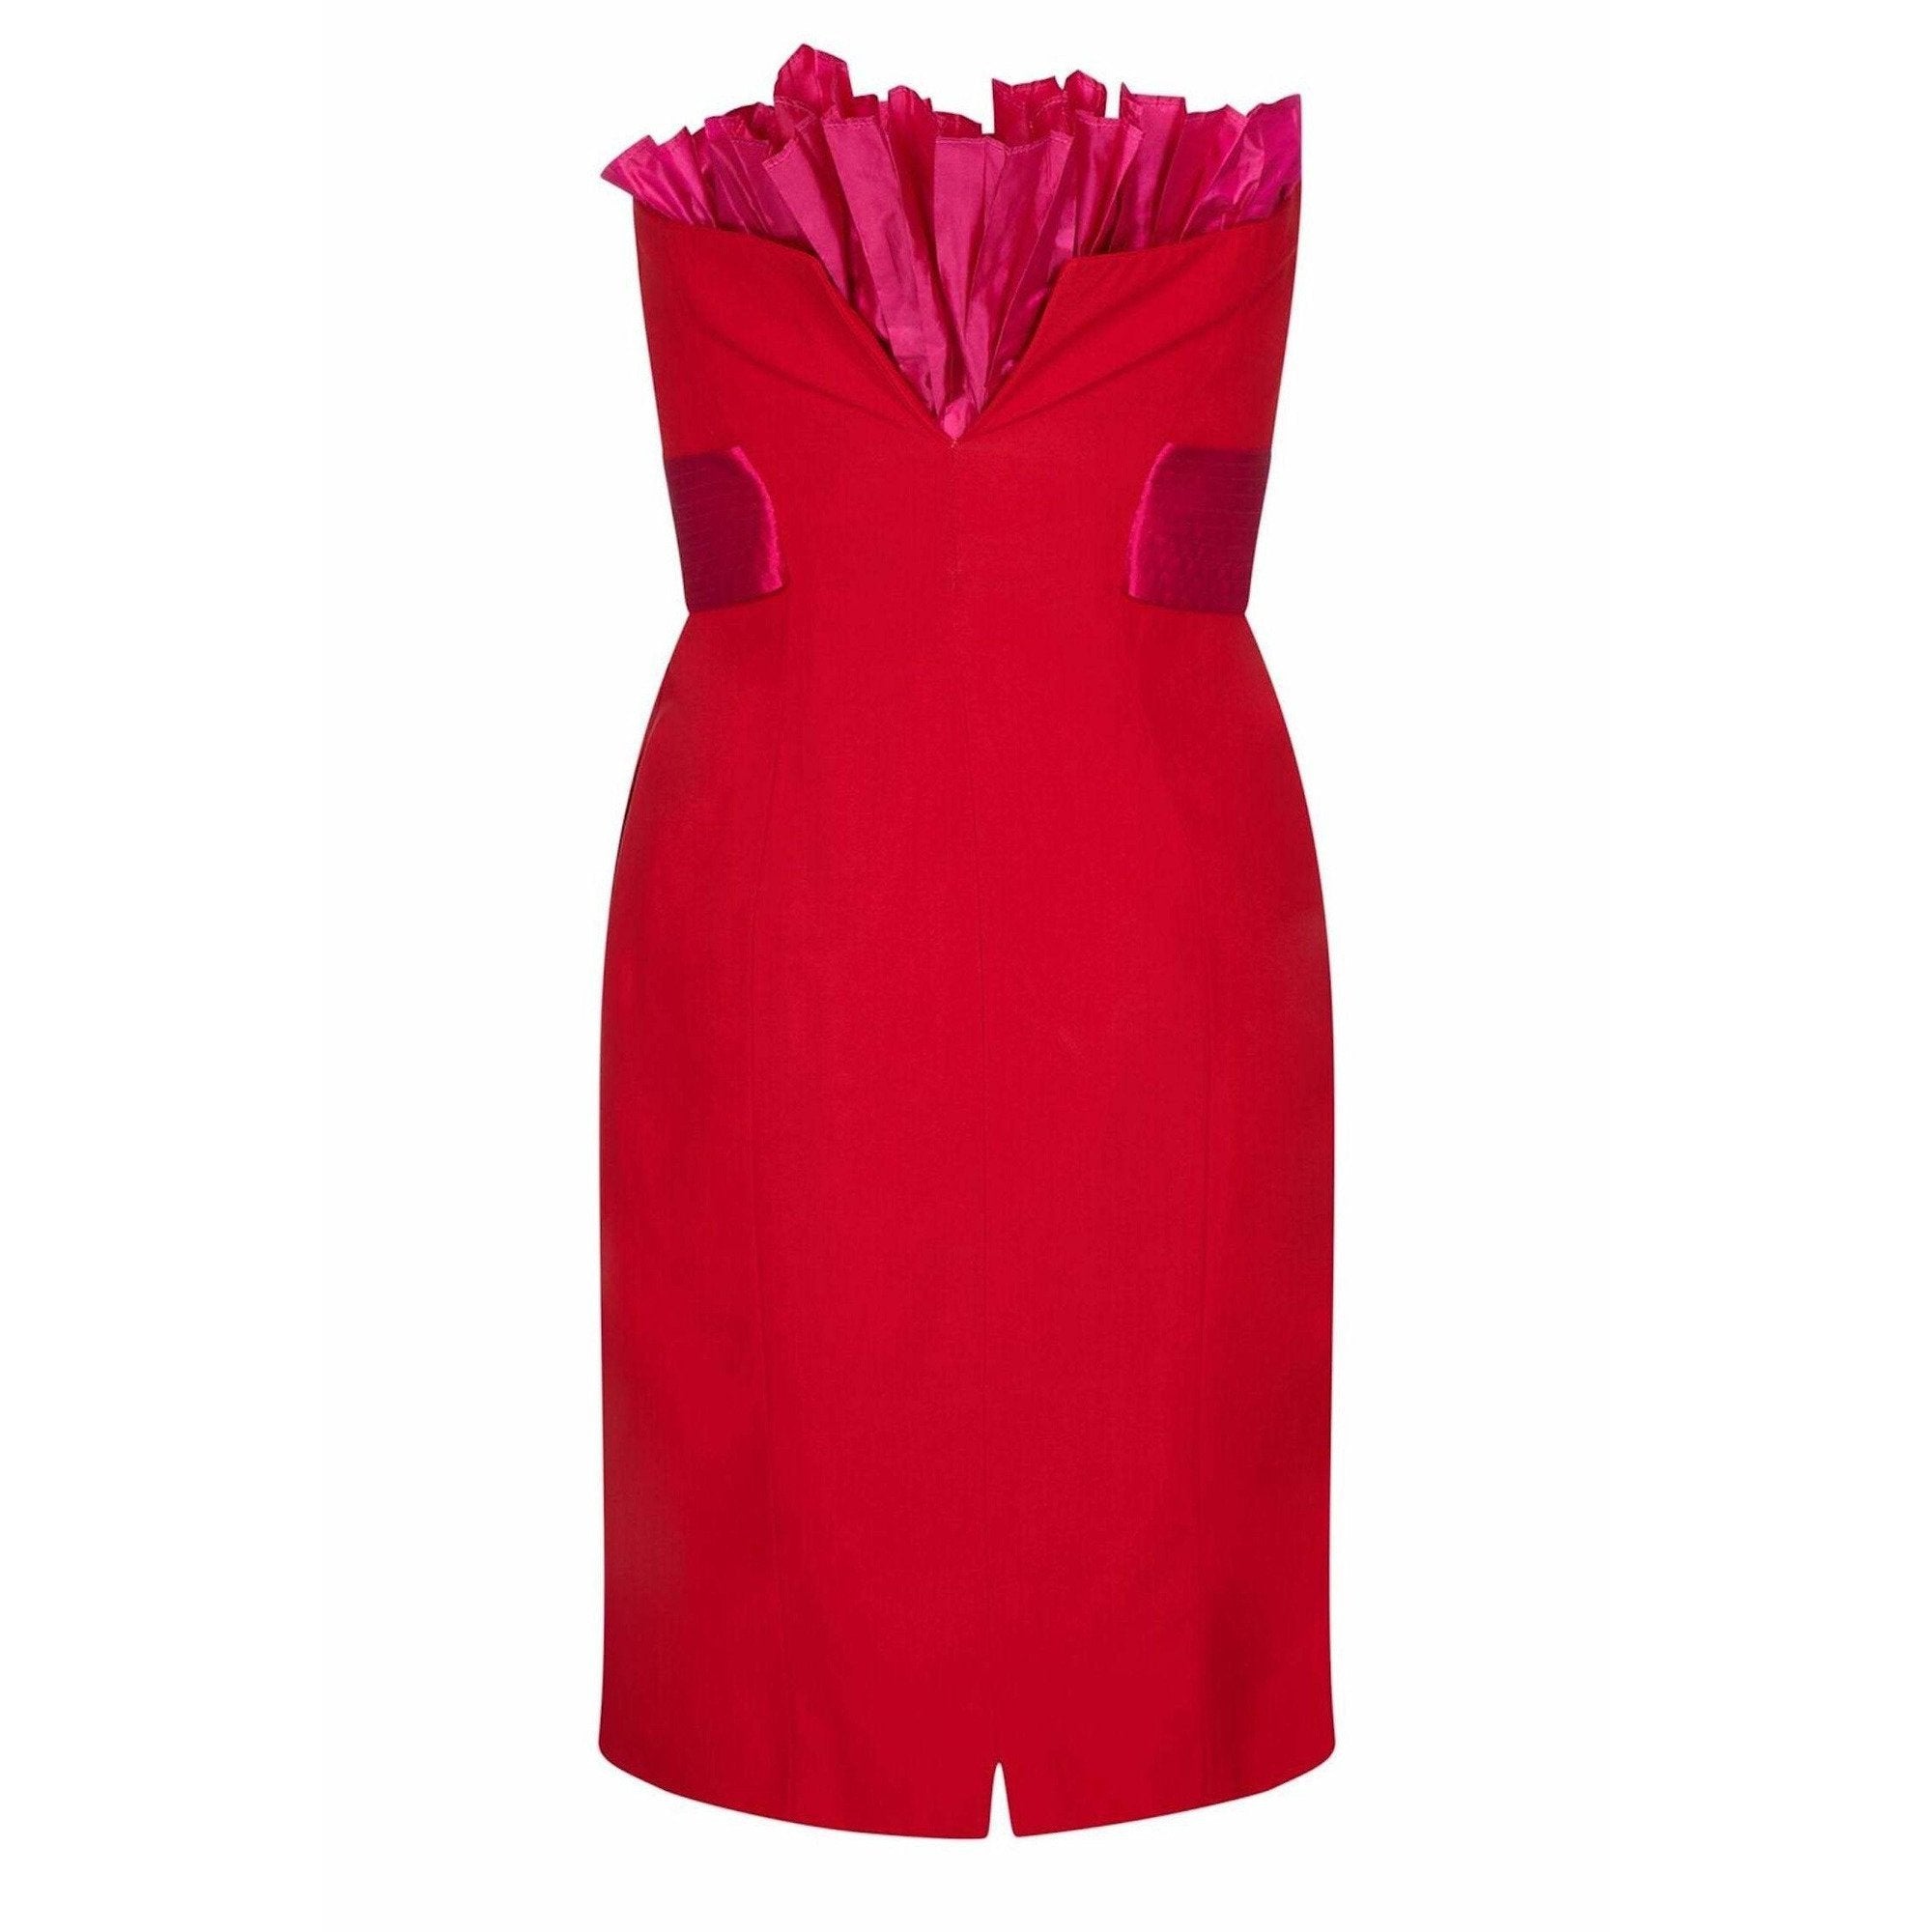 Gianfranco Ferre 1980s red Cocktail Dress With Shocking Pink Fan Detail